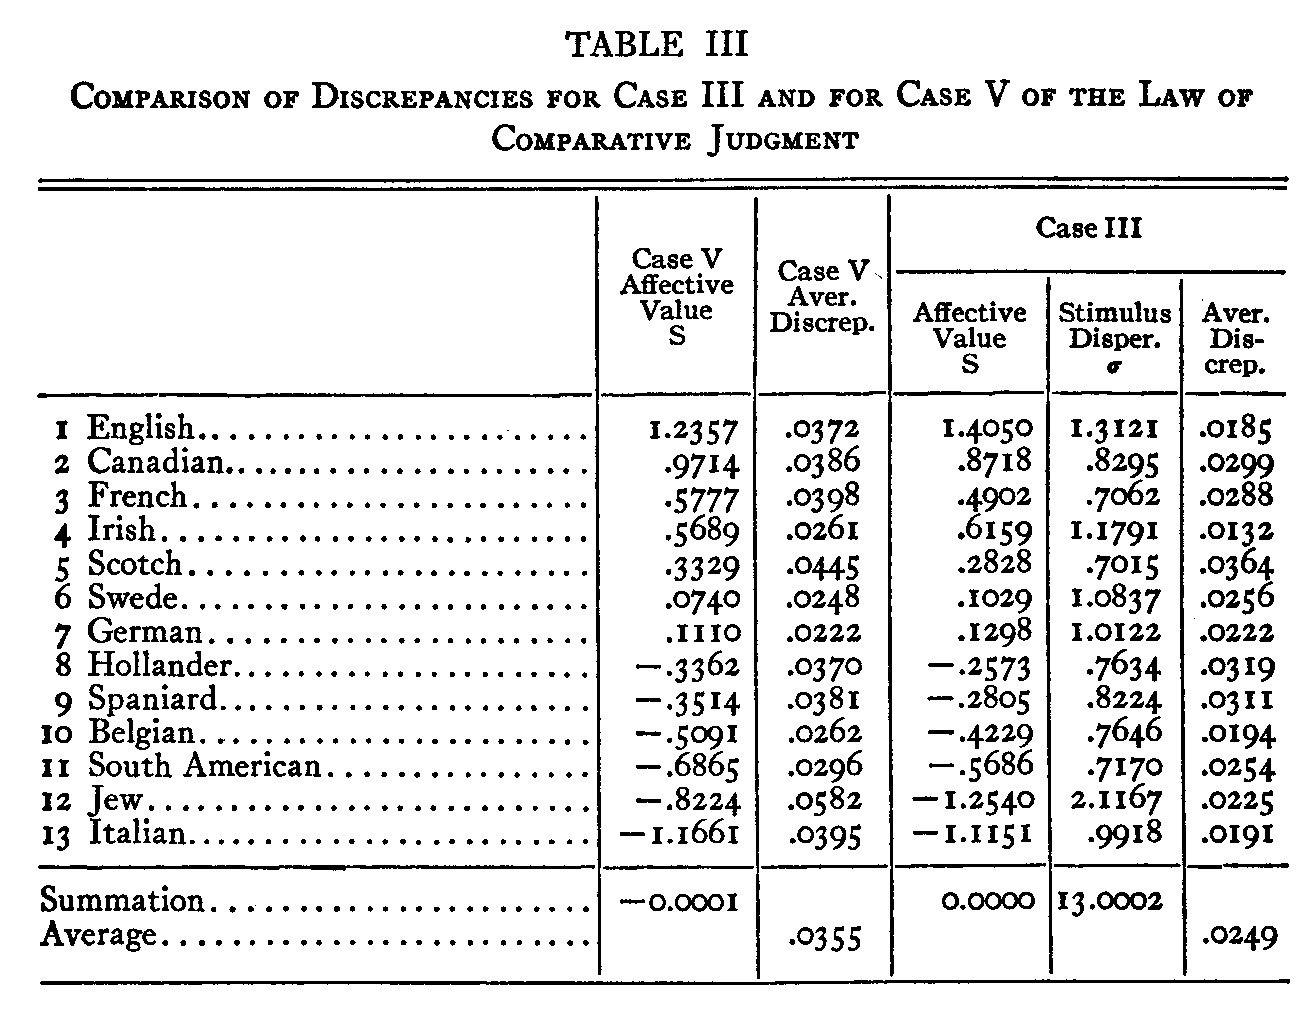 Table 3, Comparison of Discrepancies for Case III and for Case V of the Law of Comparative Judgement